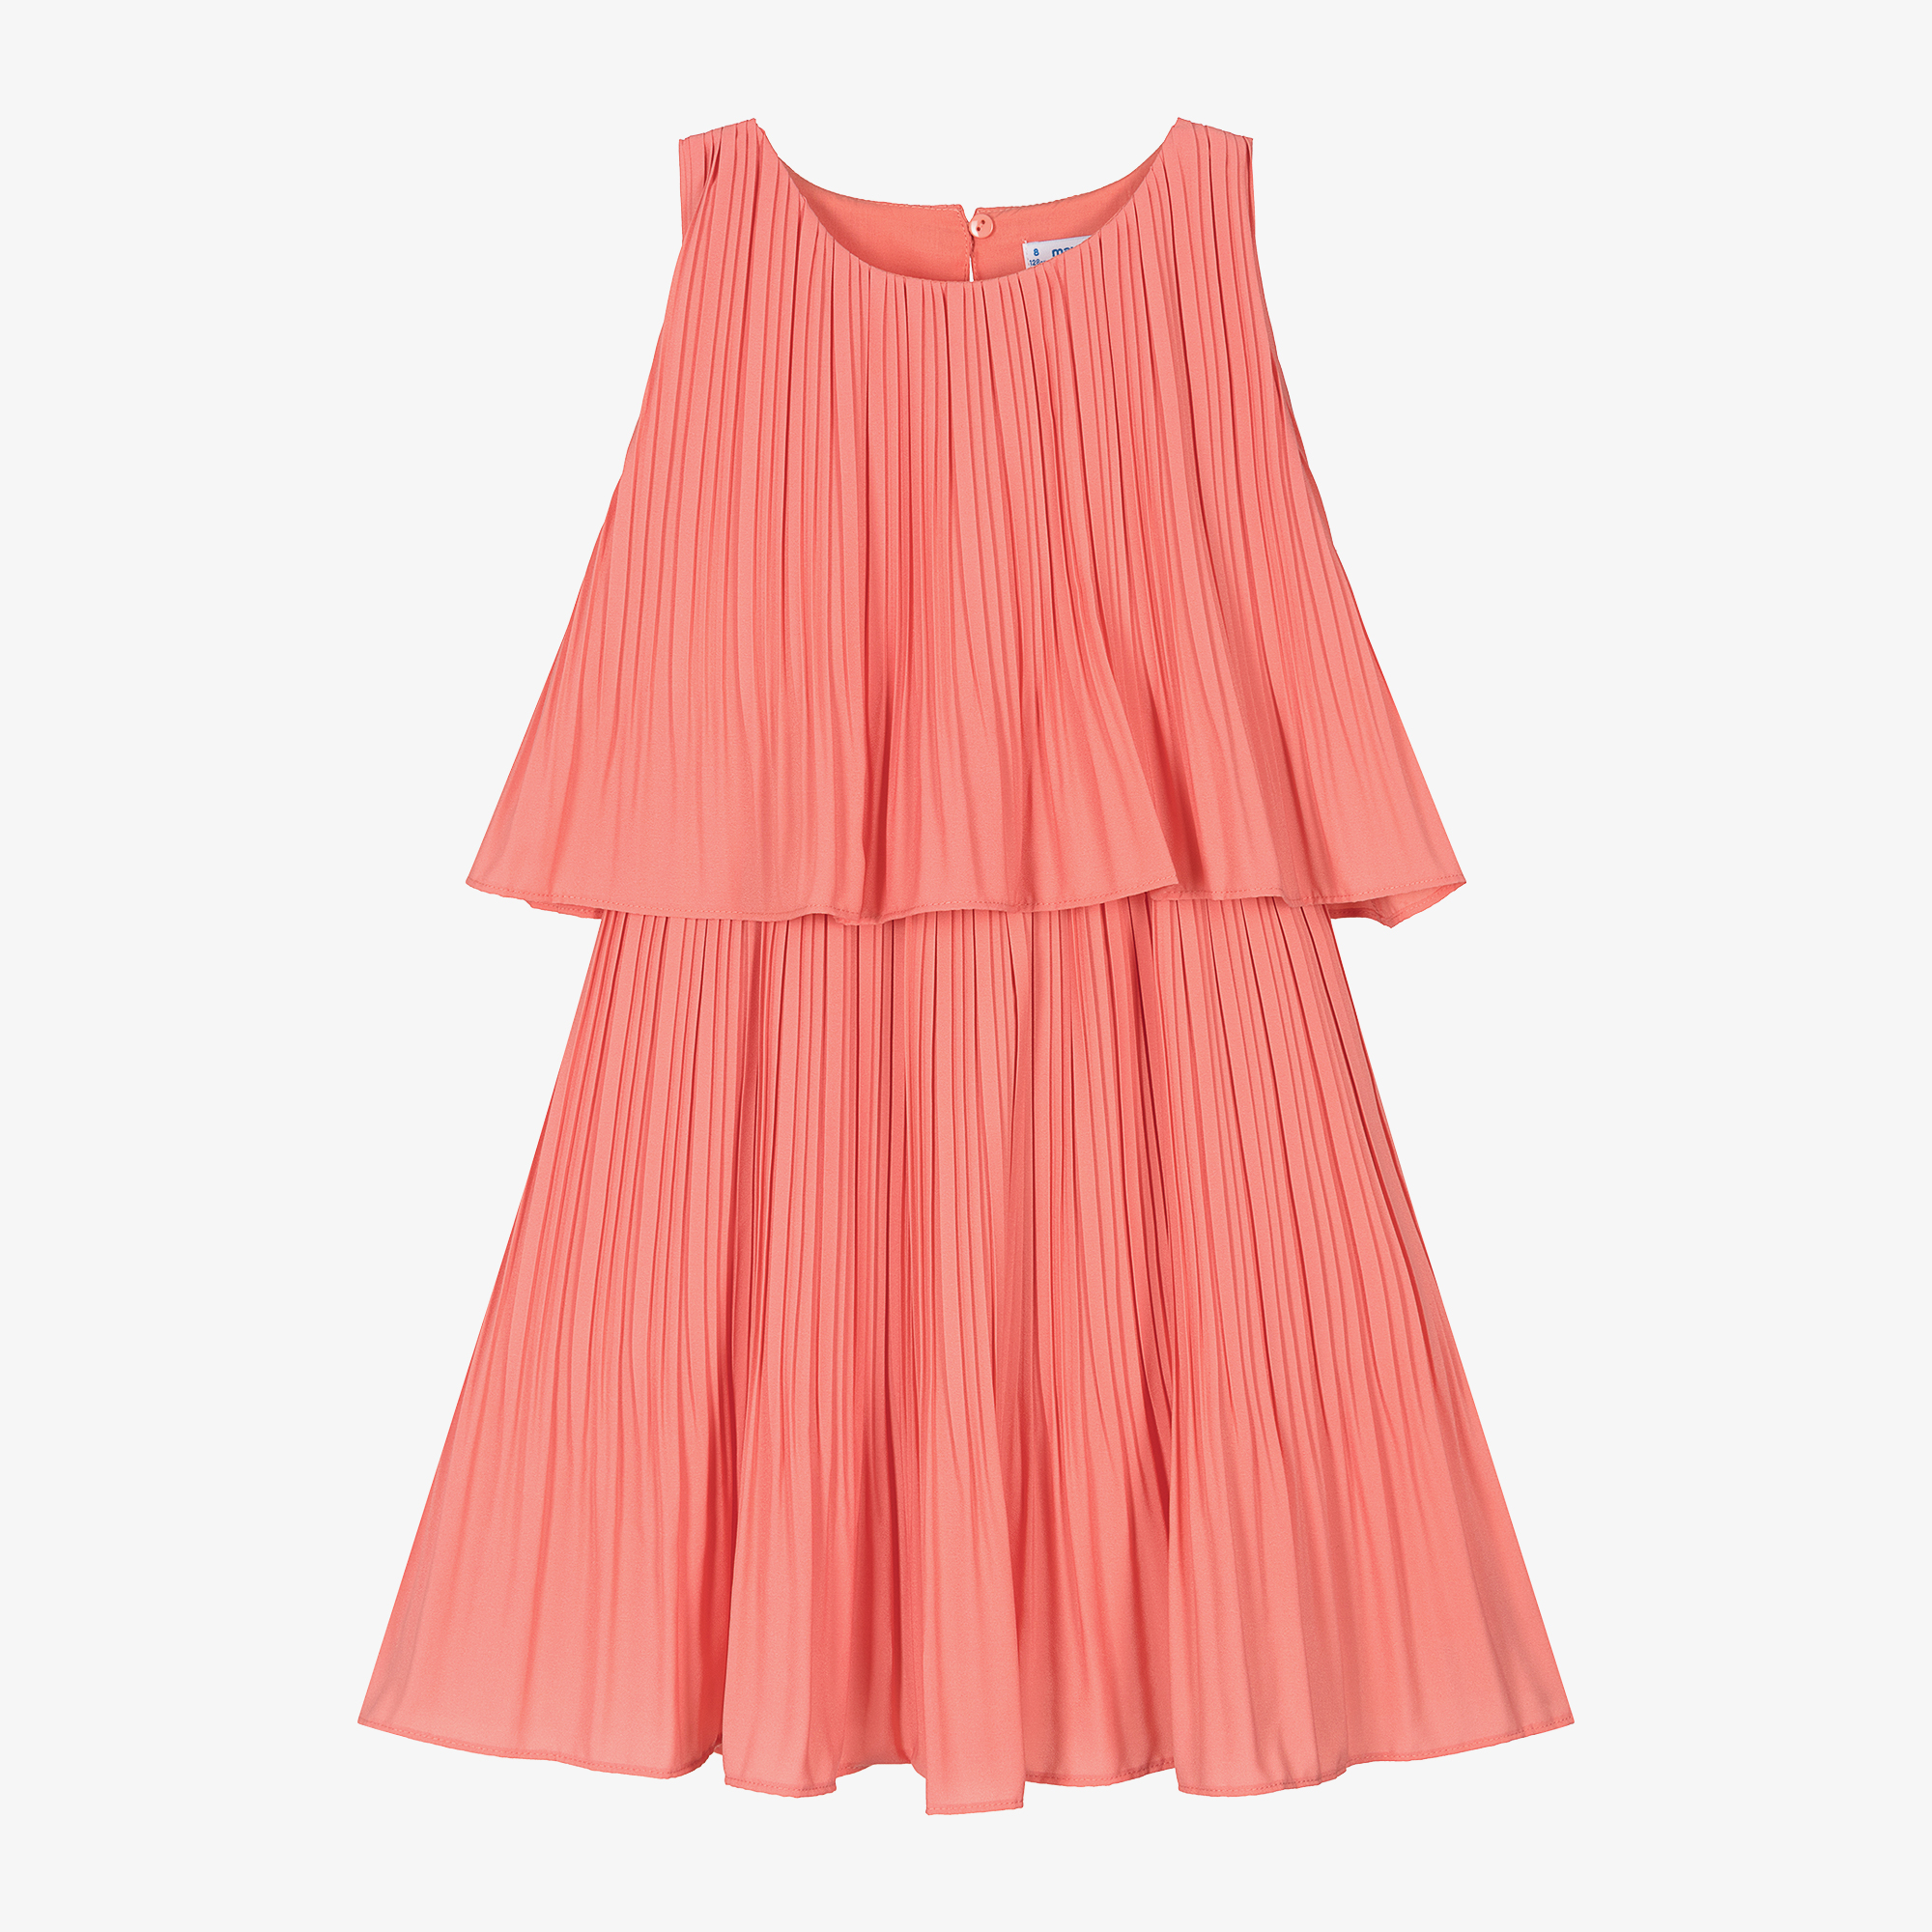 Mayoral Girls Coral Pink Pleated Dress